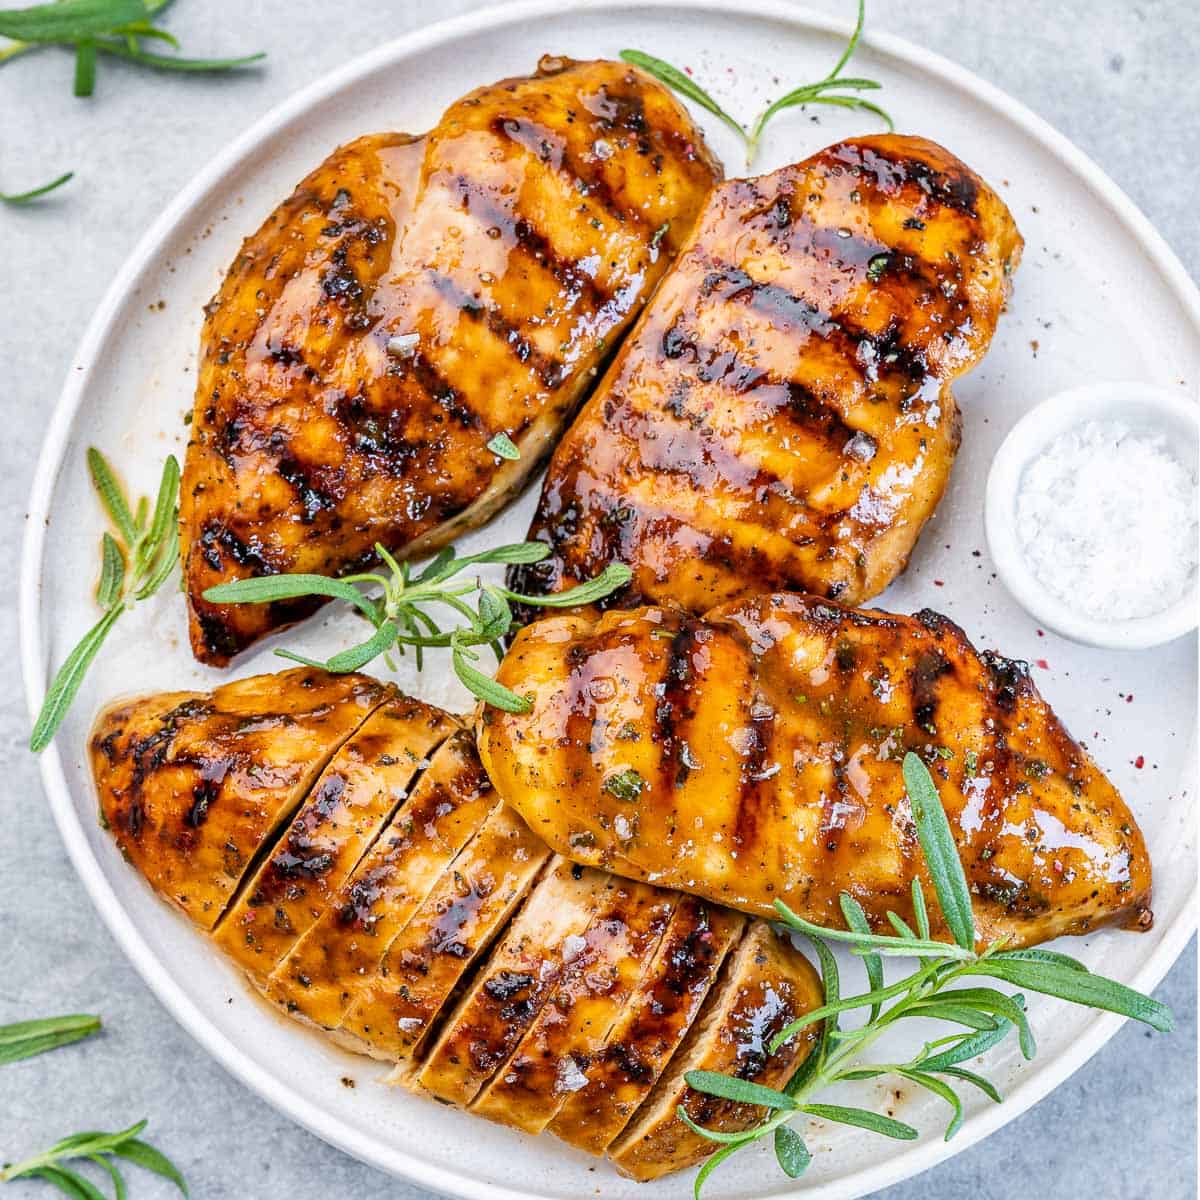 Top view of 4 grilled chicken breasts over a white plate.